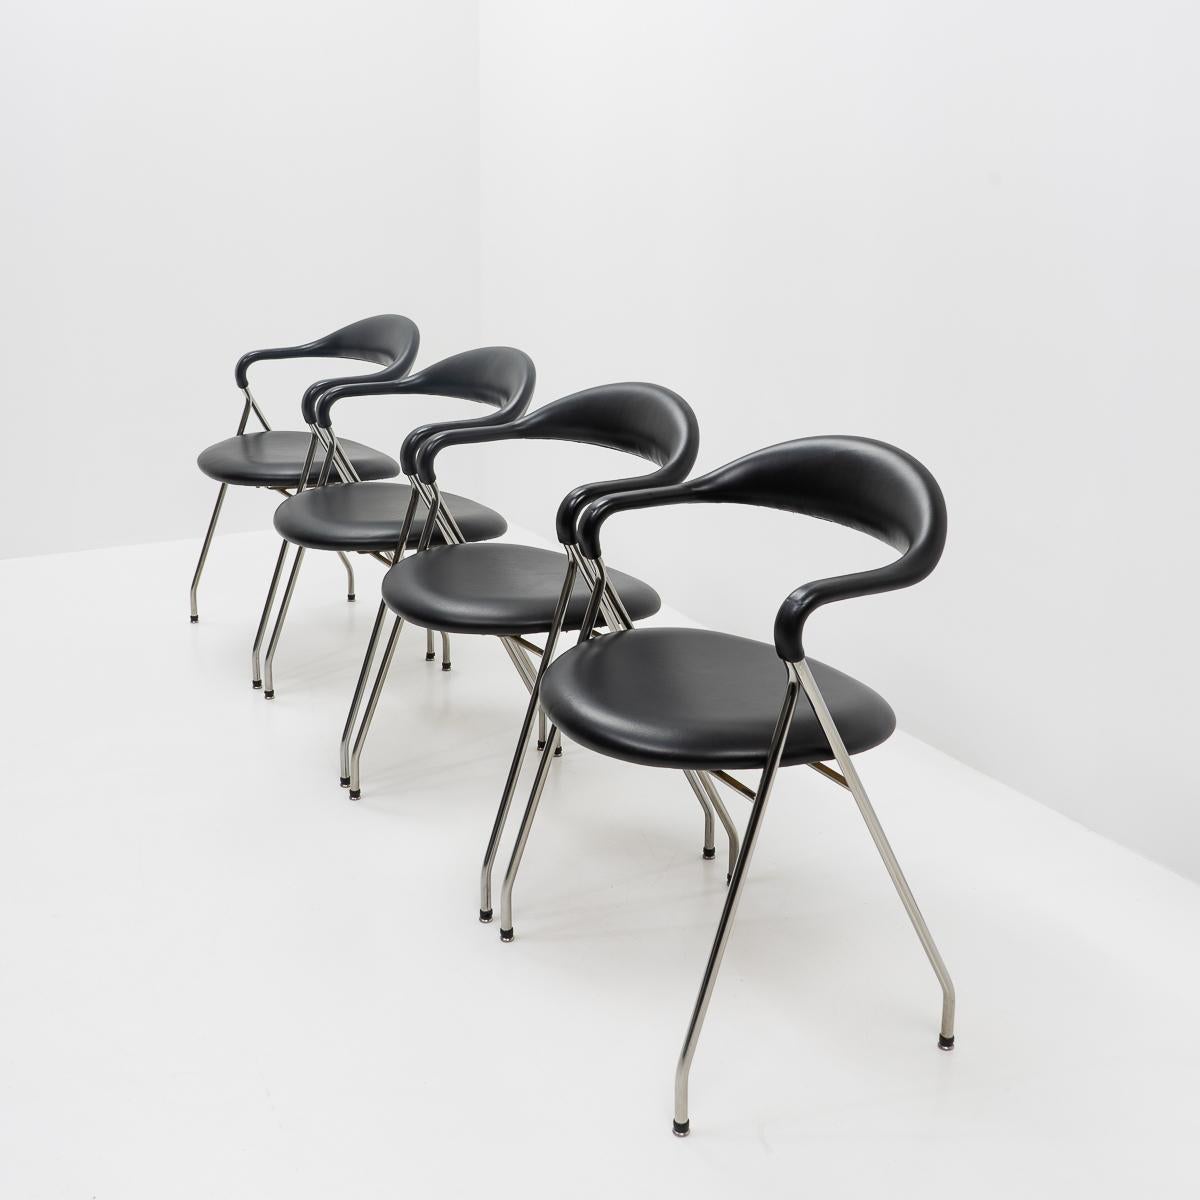 A set of four HE-103 “Saffa” chairs designed by Hans Eichenberger during the 1950s, and produced by Dietiker Switzerland. This set dates from the 1980s.


The name Saffa orginates from the “Schweizerische Ausstellung für Frauenarbeit” a large